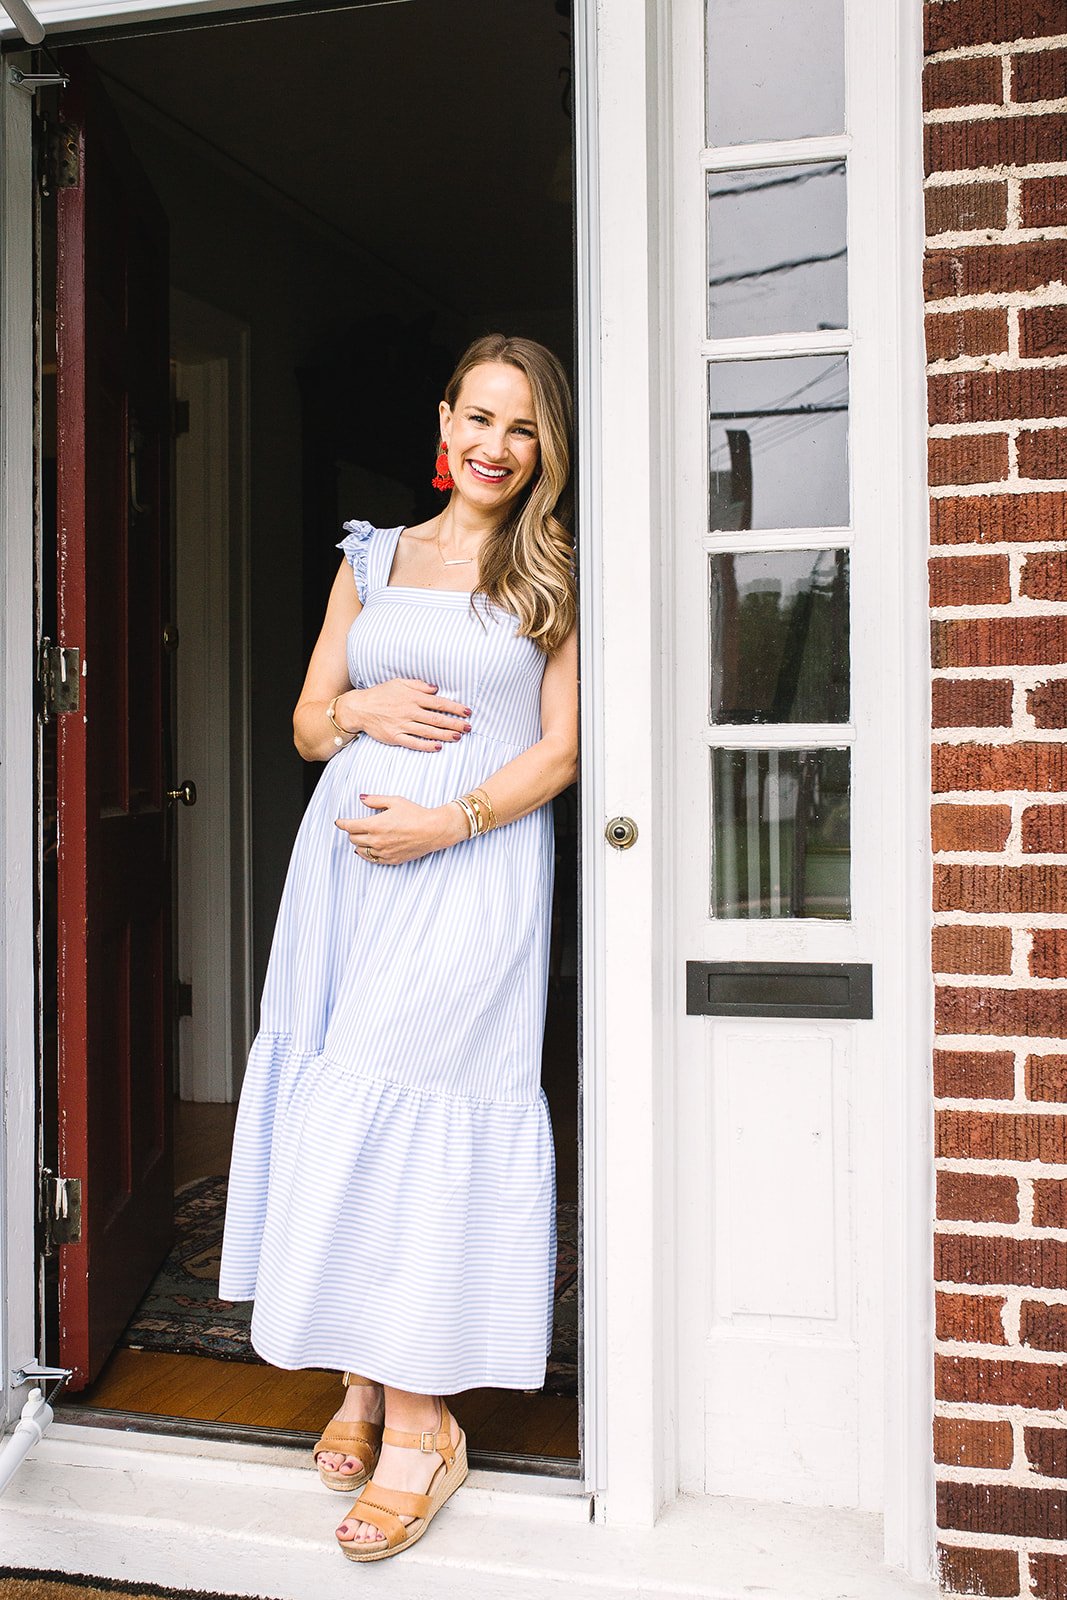 What to Wear for a Maternity Photo Session